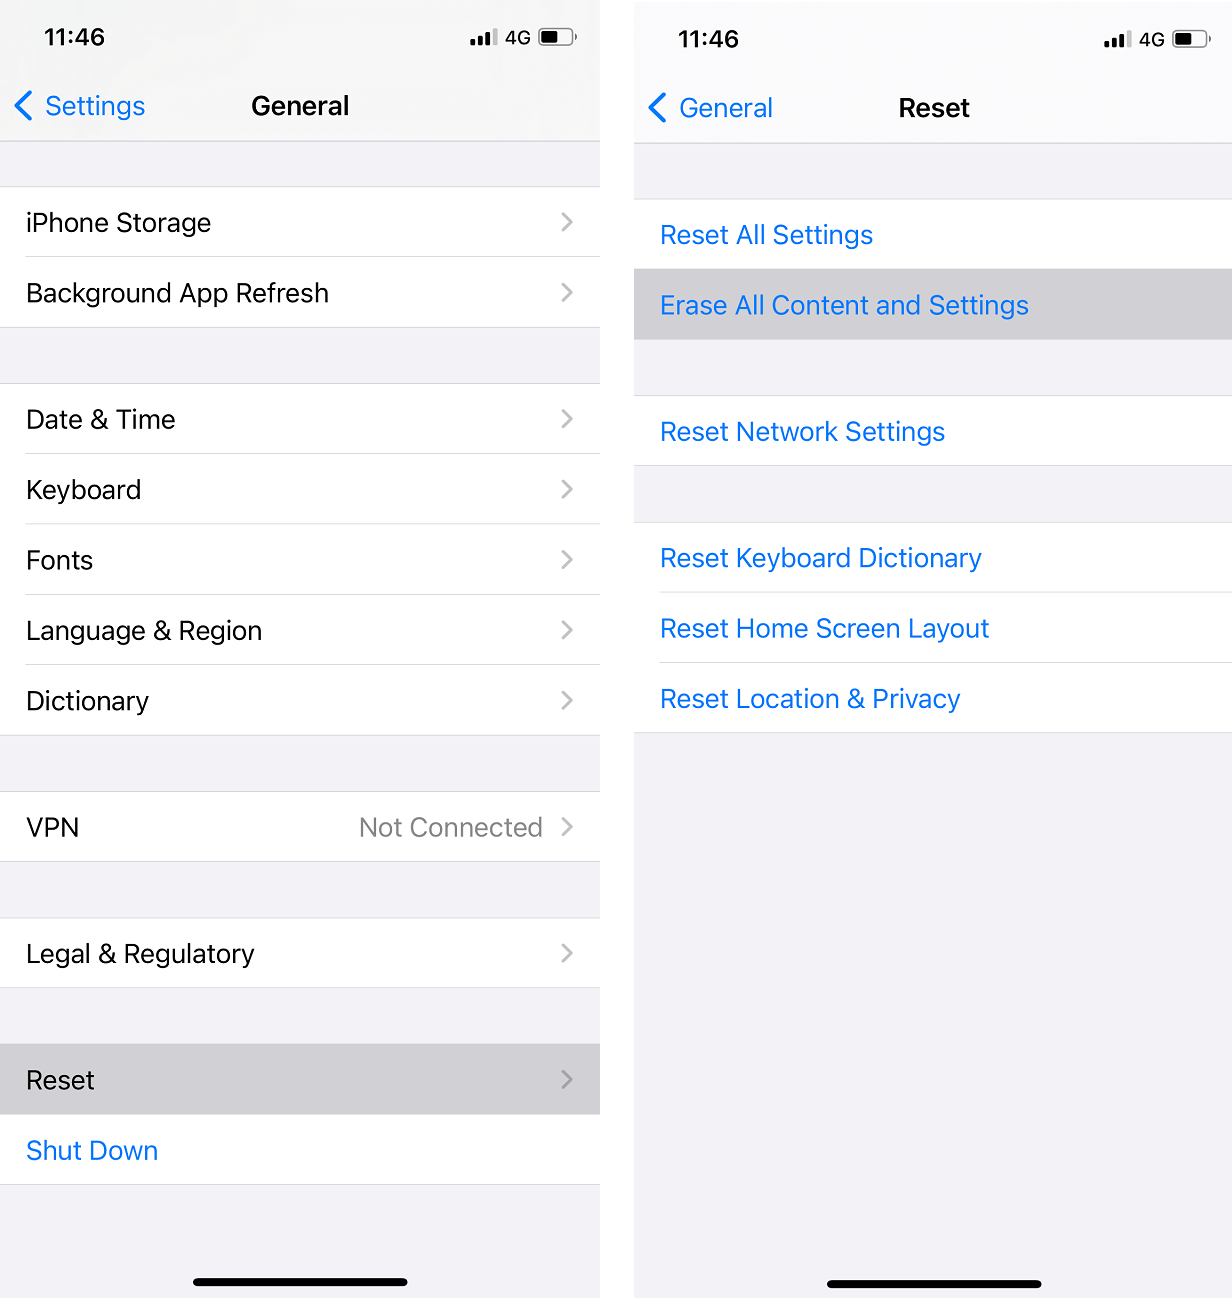 Click on Reset and then go for the Erase All Content and Settings option.my iPhone is frozen and won't turn off or reset